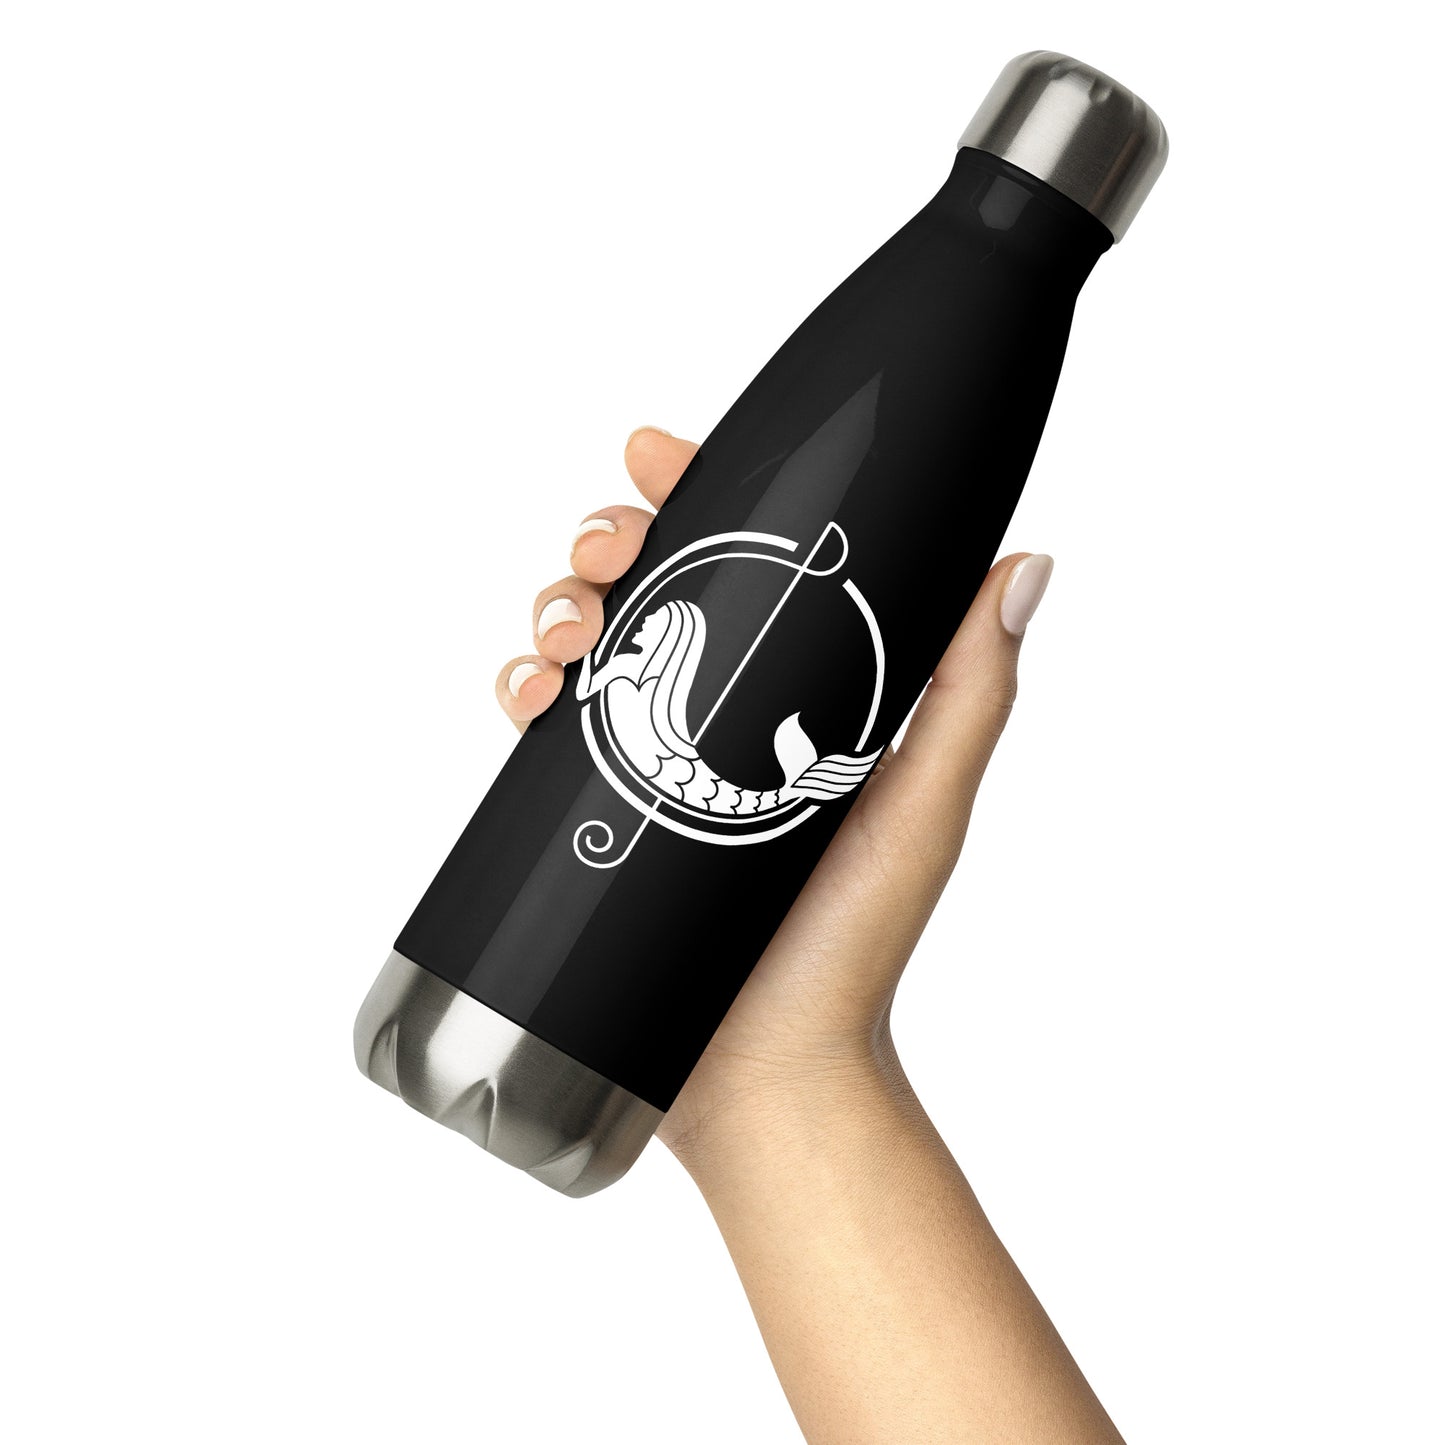 Sirens of Gotham - Stainless steel water bottle